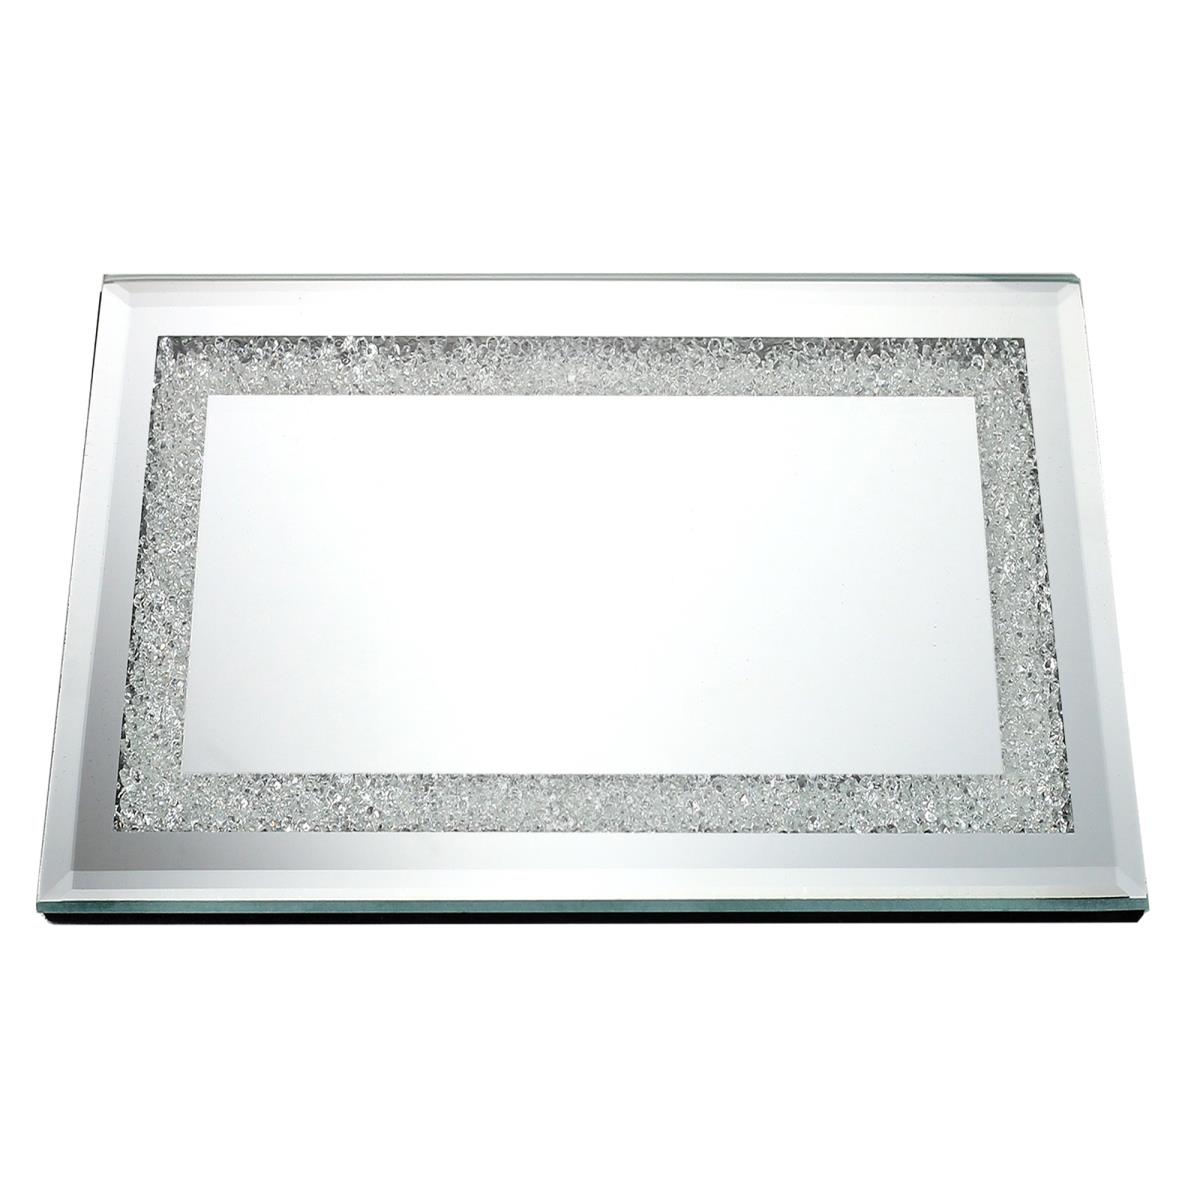 Gs5510 13.8 X 9.8 In. Mirror Tray With Diamonds